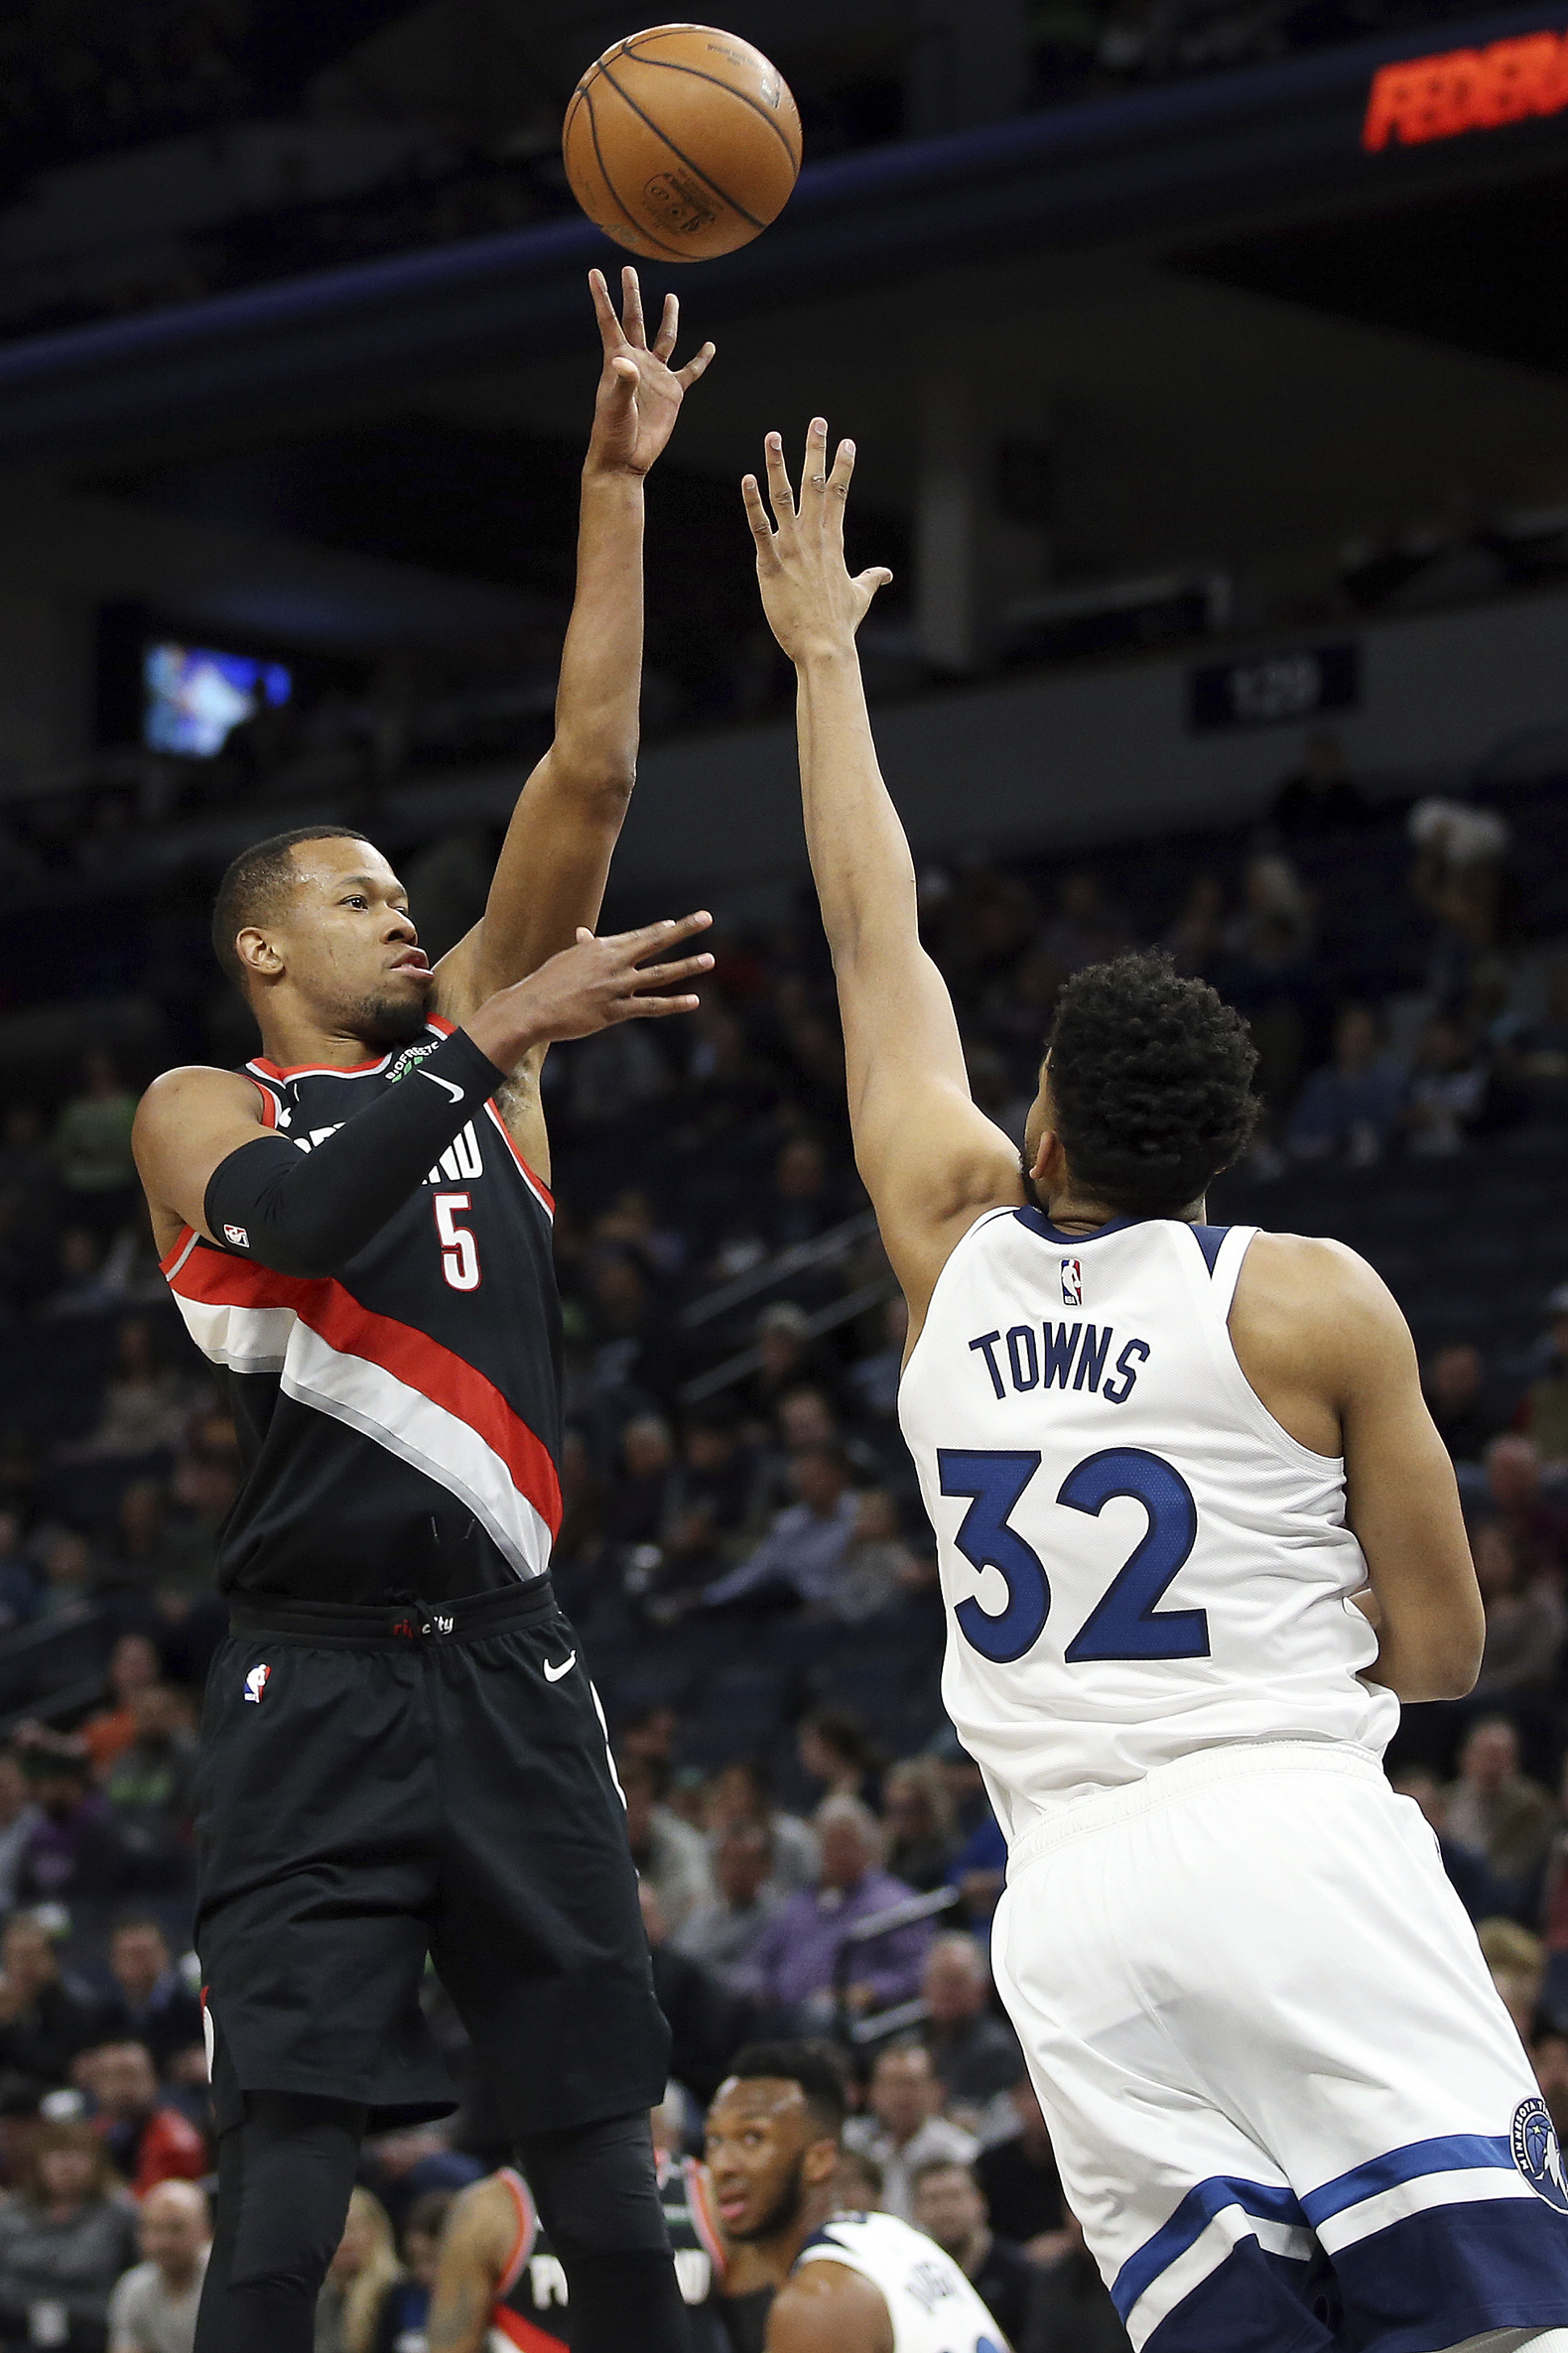 Turner has triple-double as Blazers top Wolves, 132-122